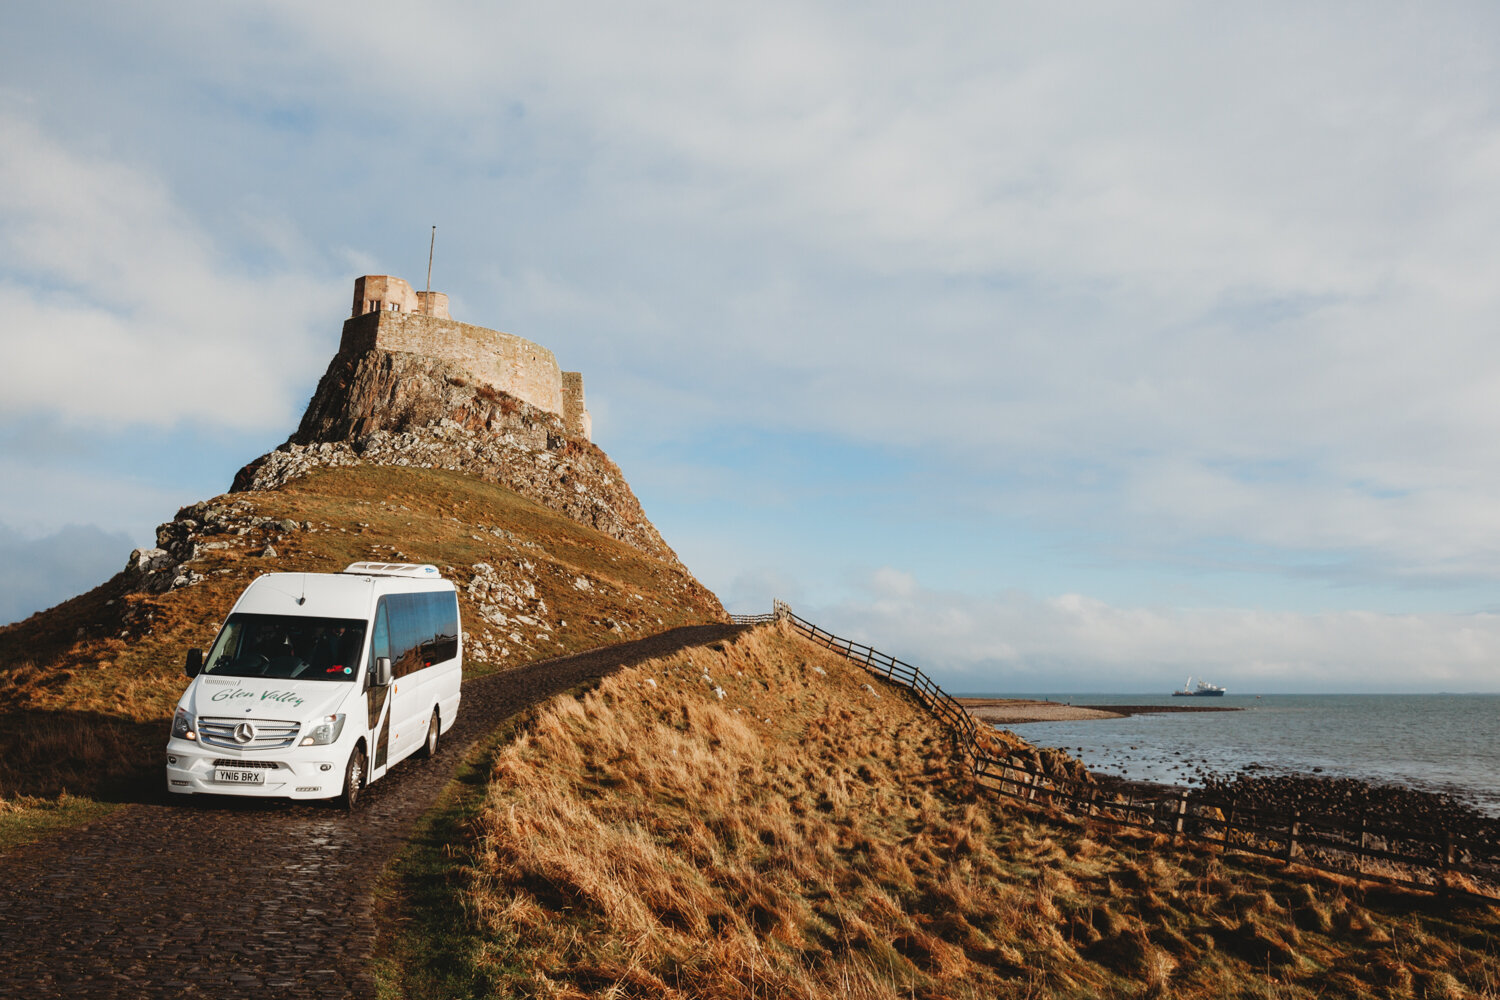 PICTORIAL_wedding-lindisfarne-castle-northumberland-photographer-mead-locally-sourced-holy-island-17.jpg